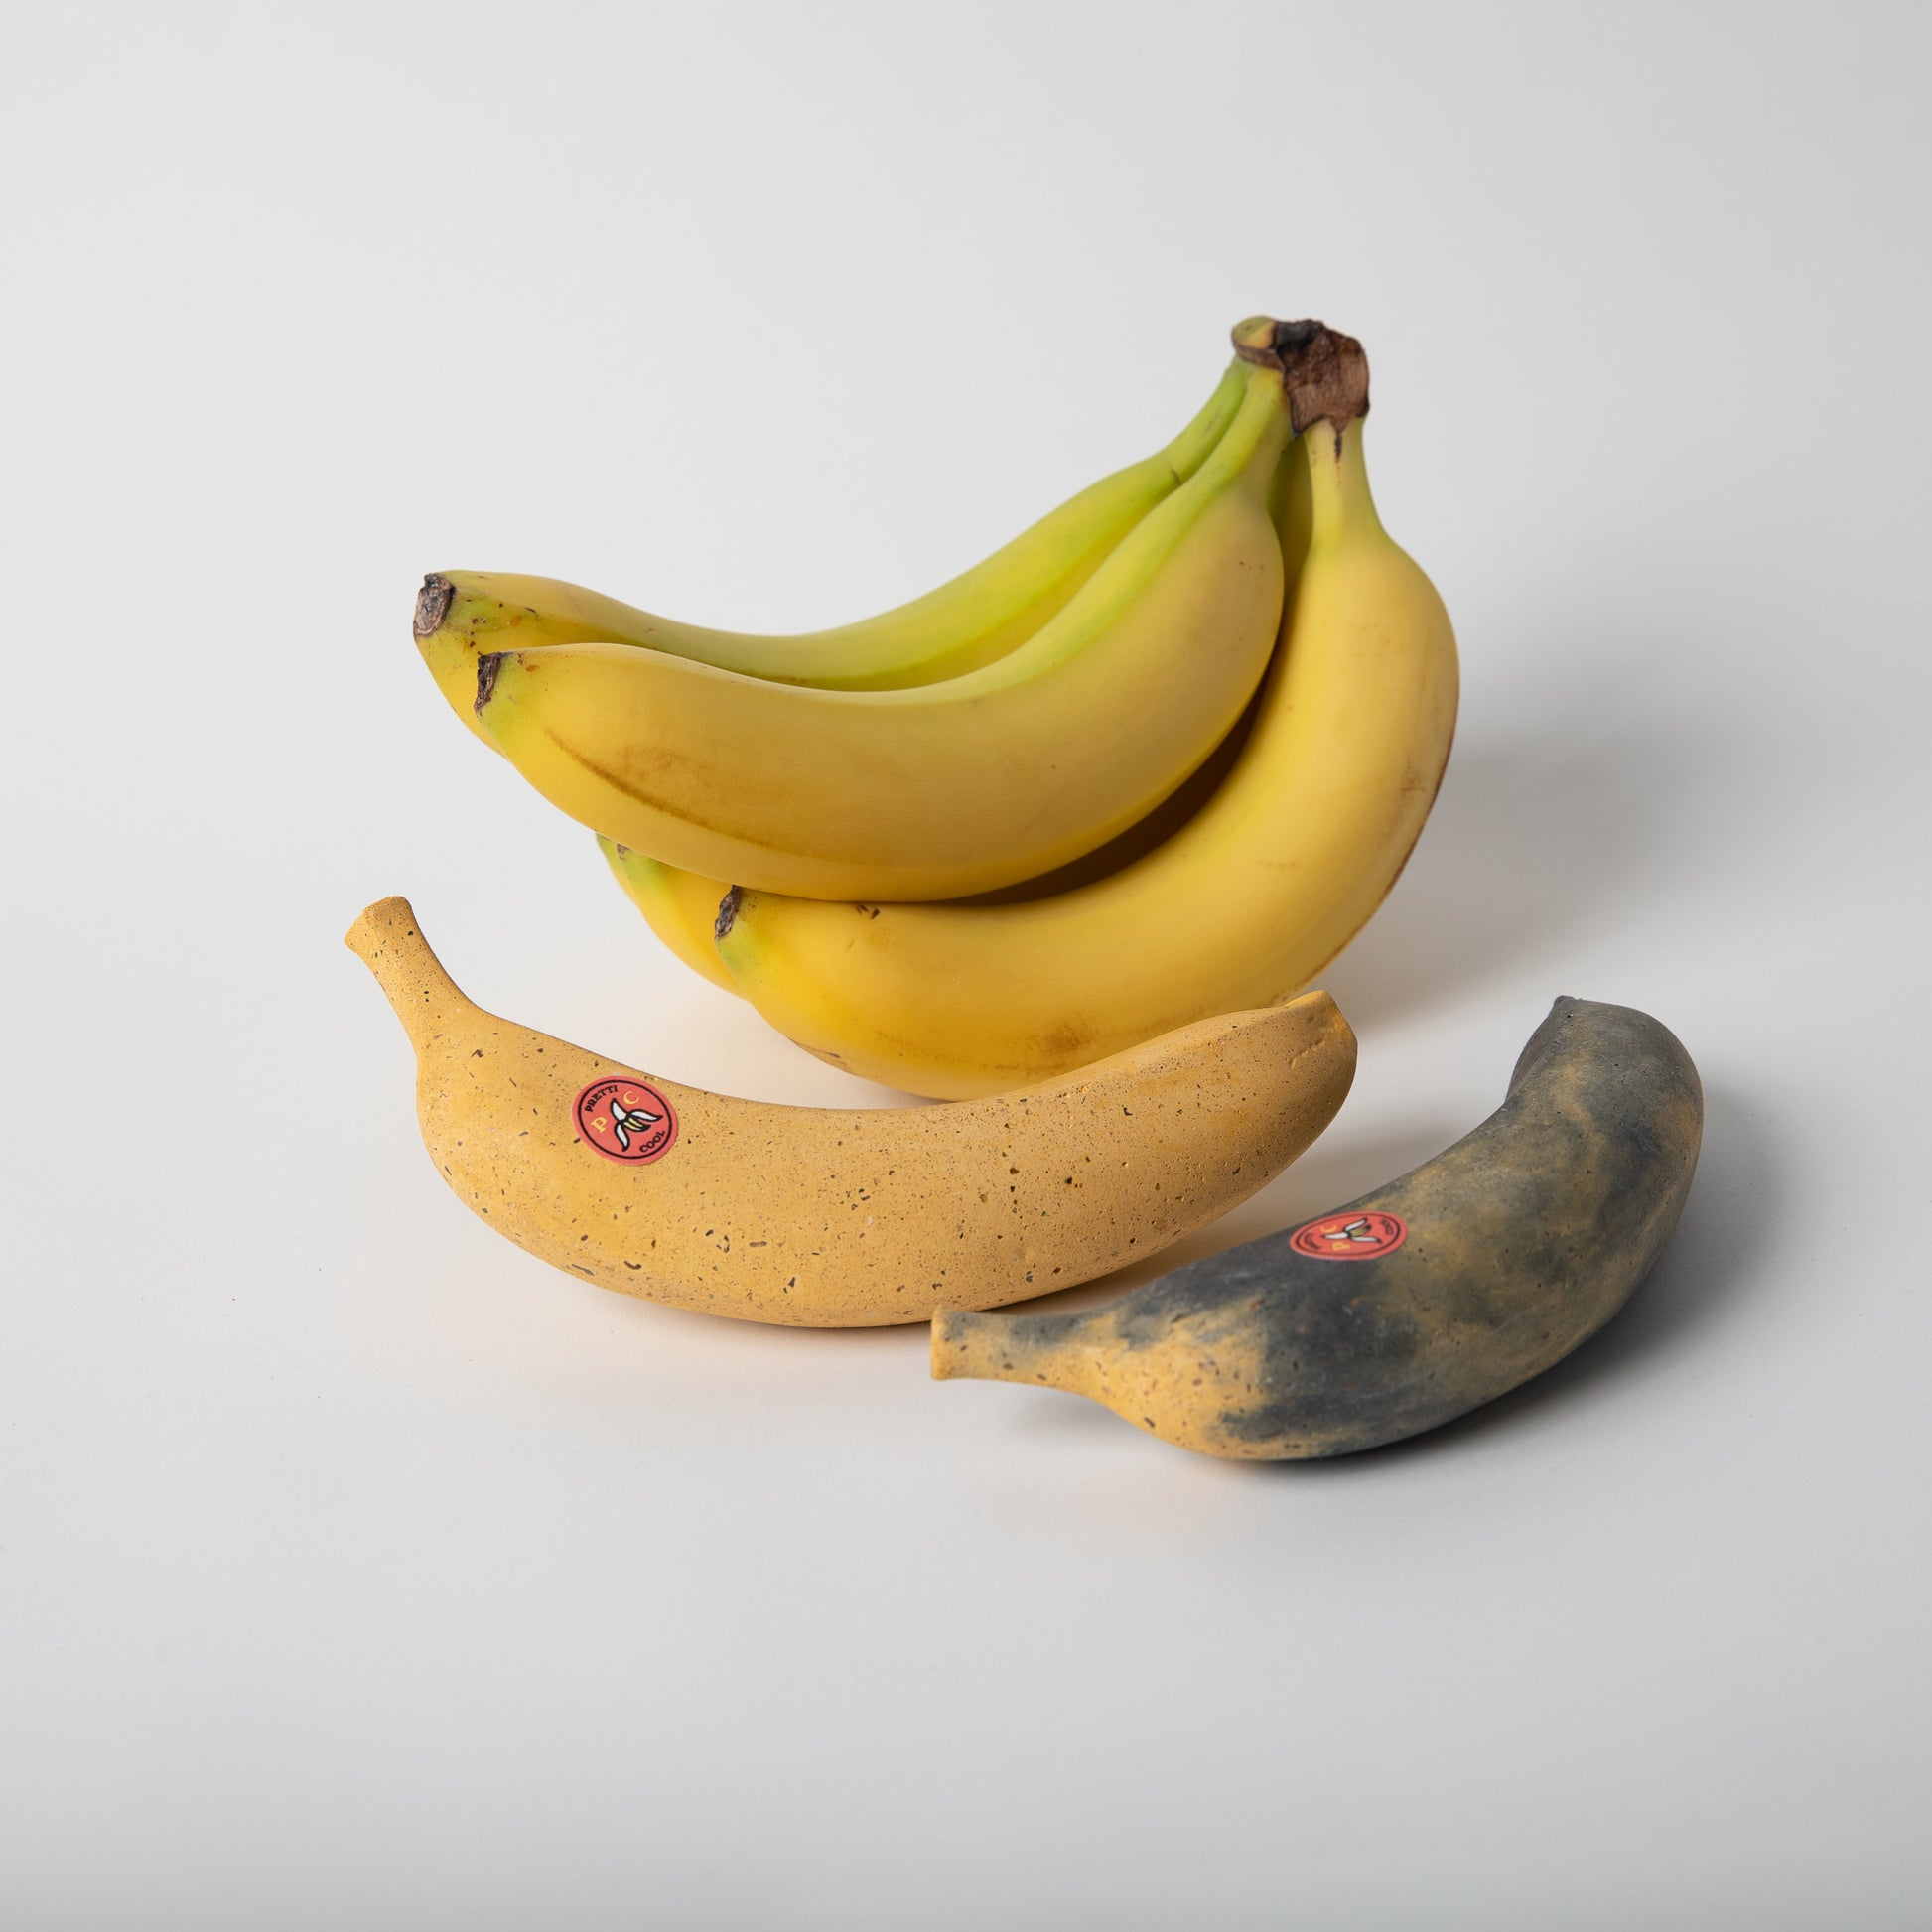 Concrete banana in both styles, banana bread (overly ripe color) and perfectly ripe next to bunch of real bananas.